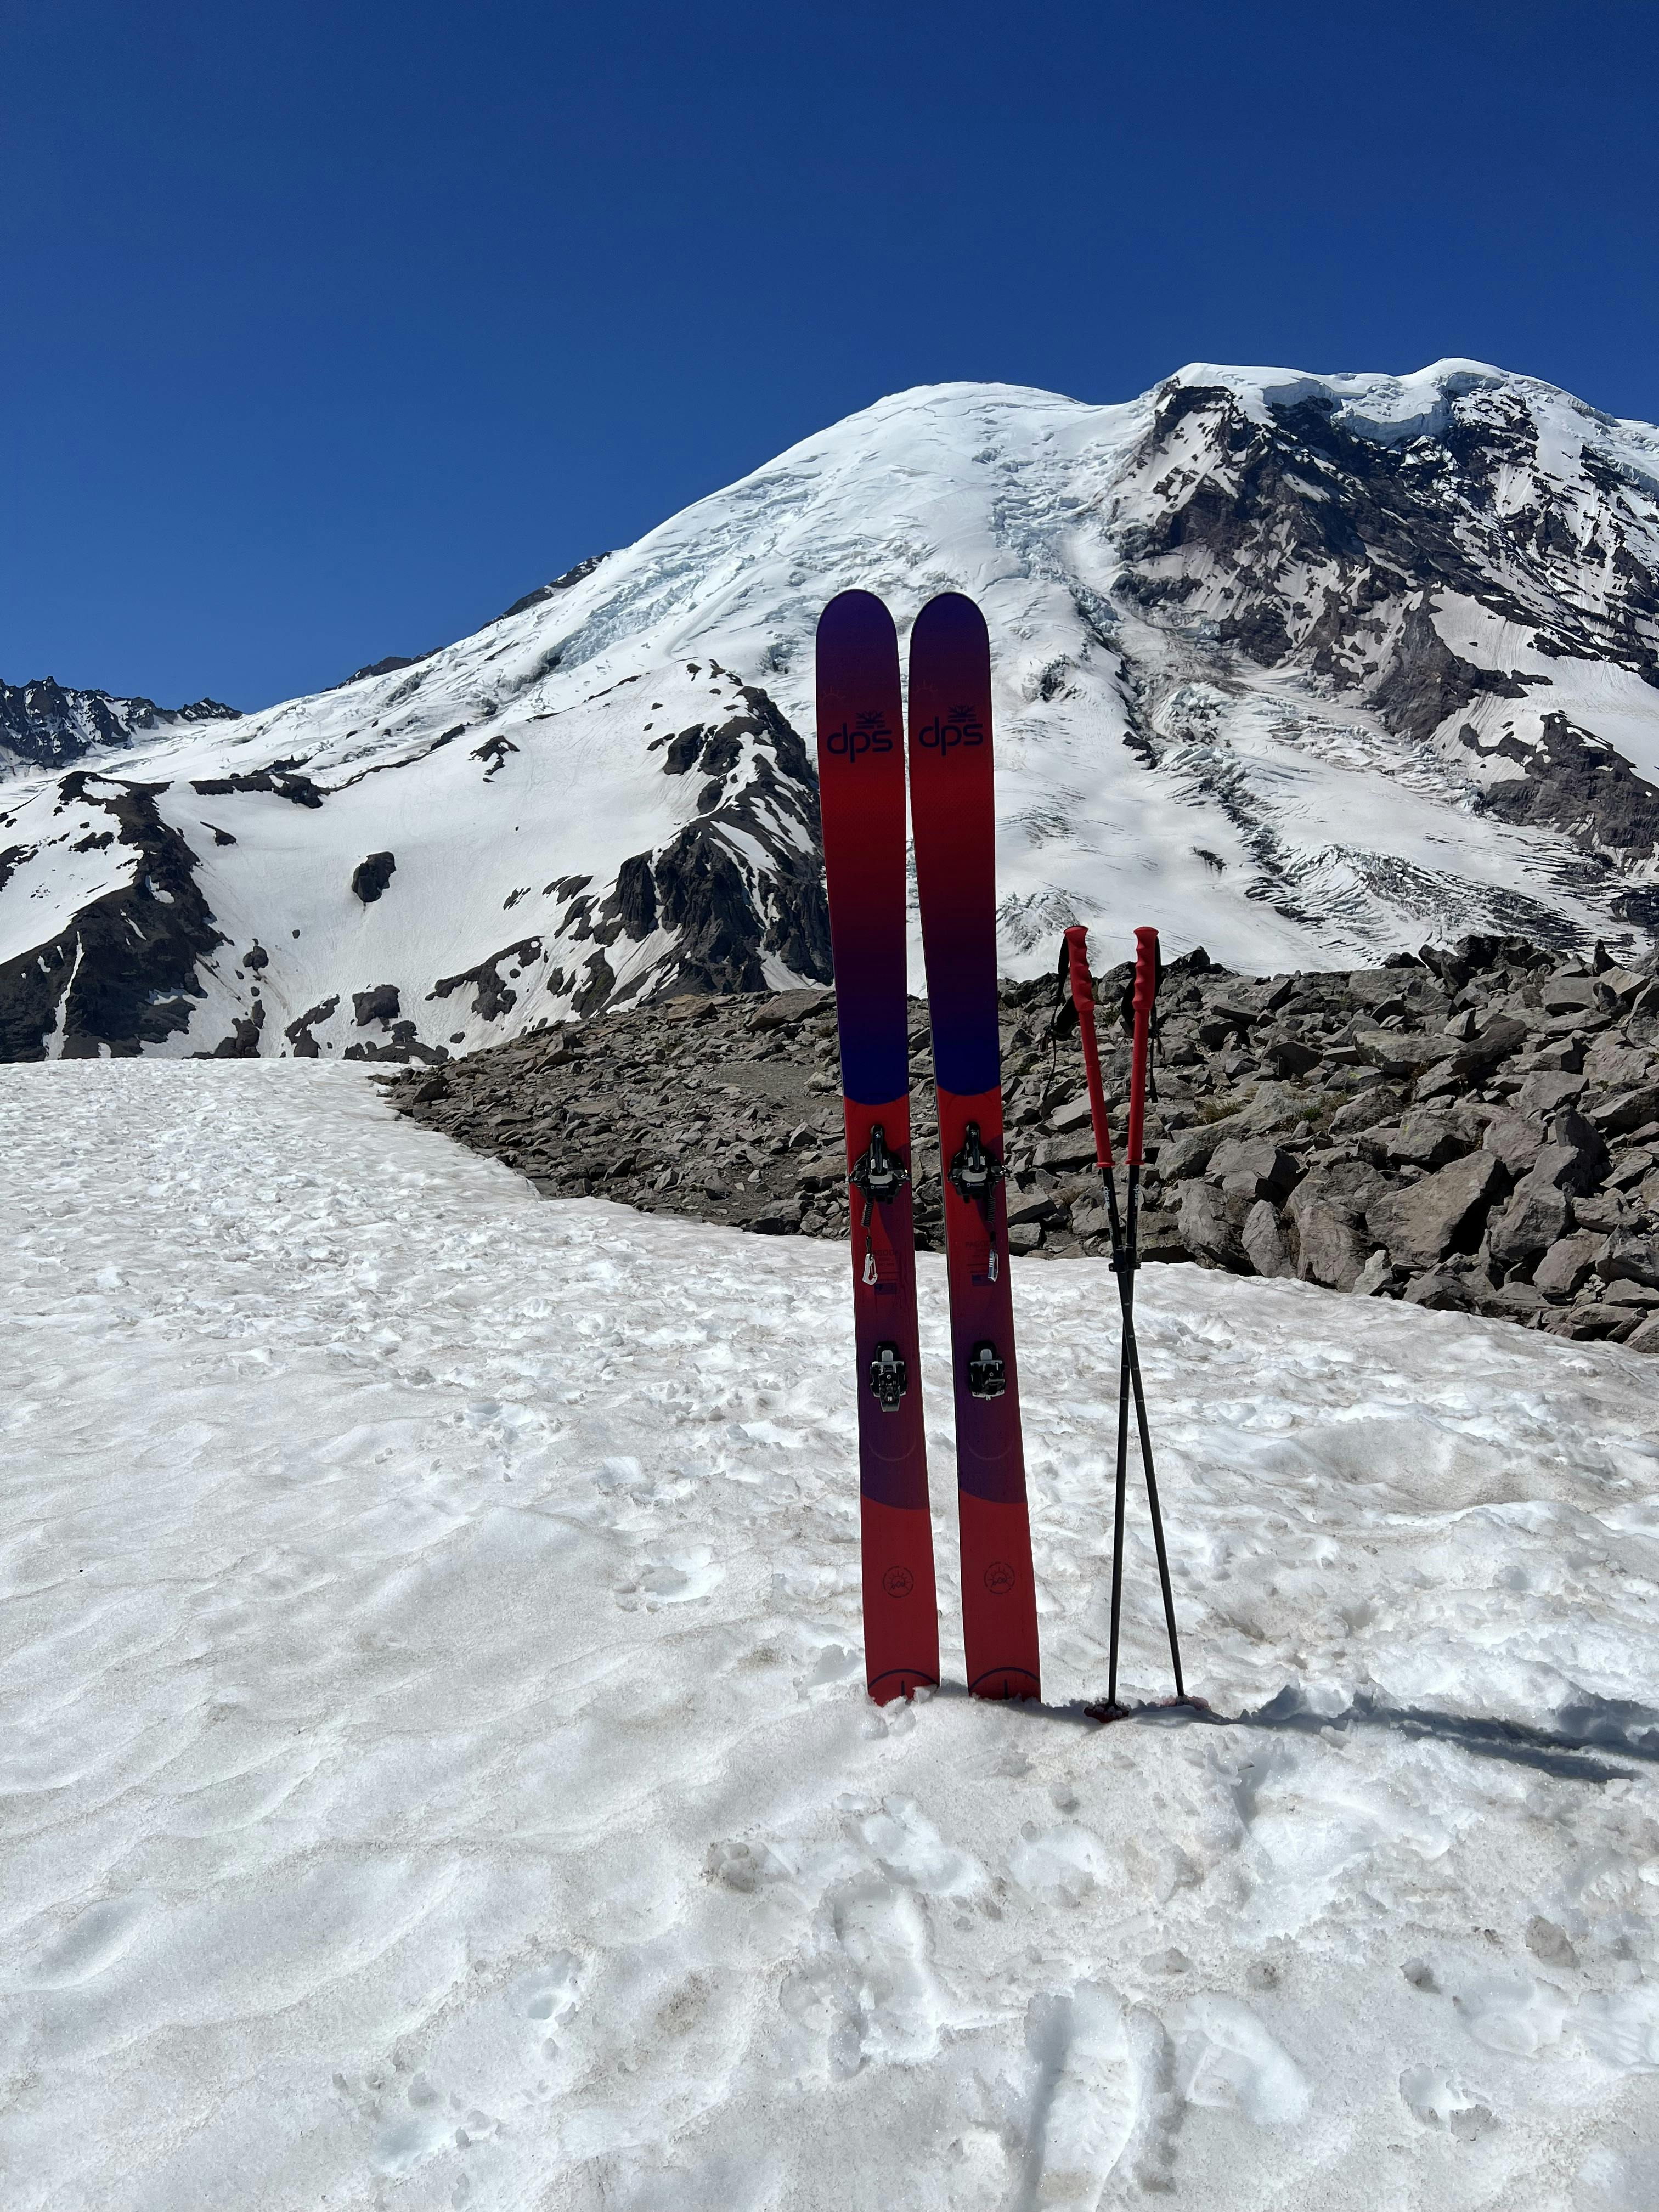 The DPS Pagoda Tour 100 RP Dreamtime Skis · 2021 sticking in the snow with a snowy mountain in the background. 